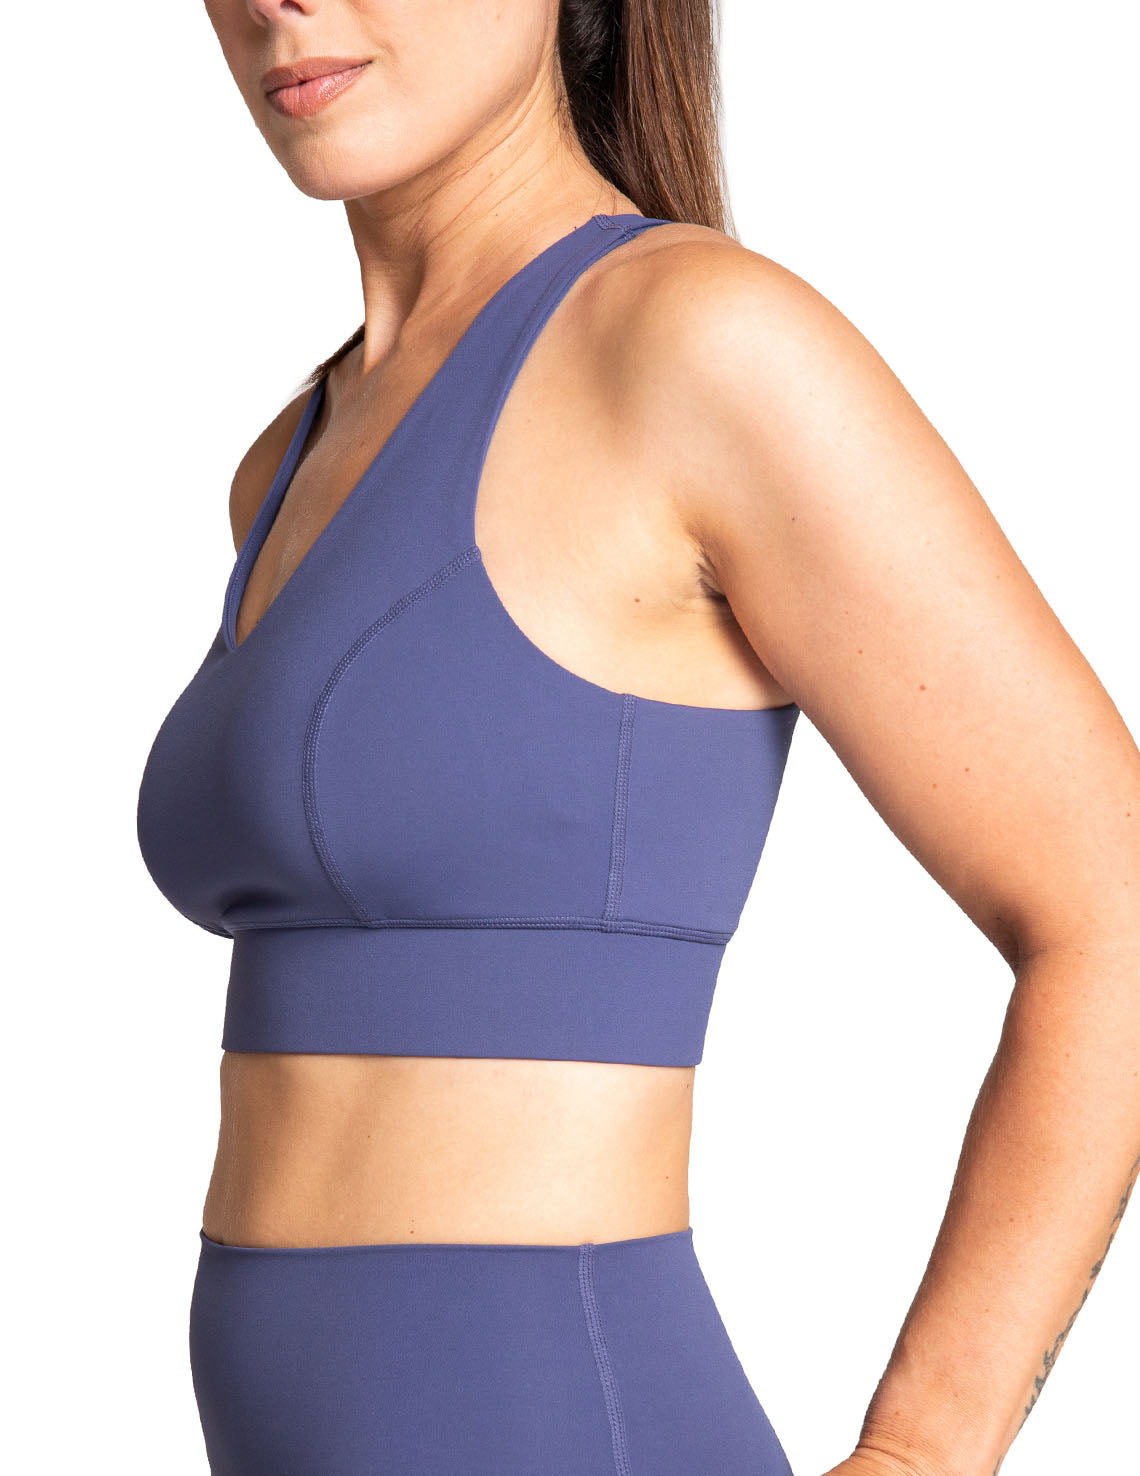 Sports Bra with Hook-and-Eye Closure, Medium to High Support, Navy